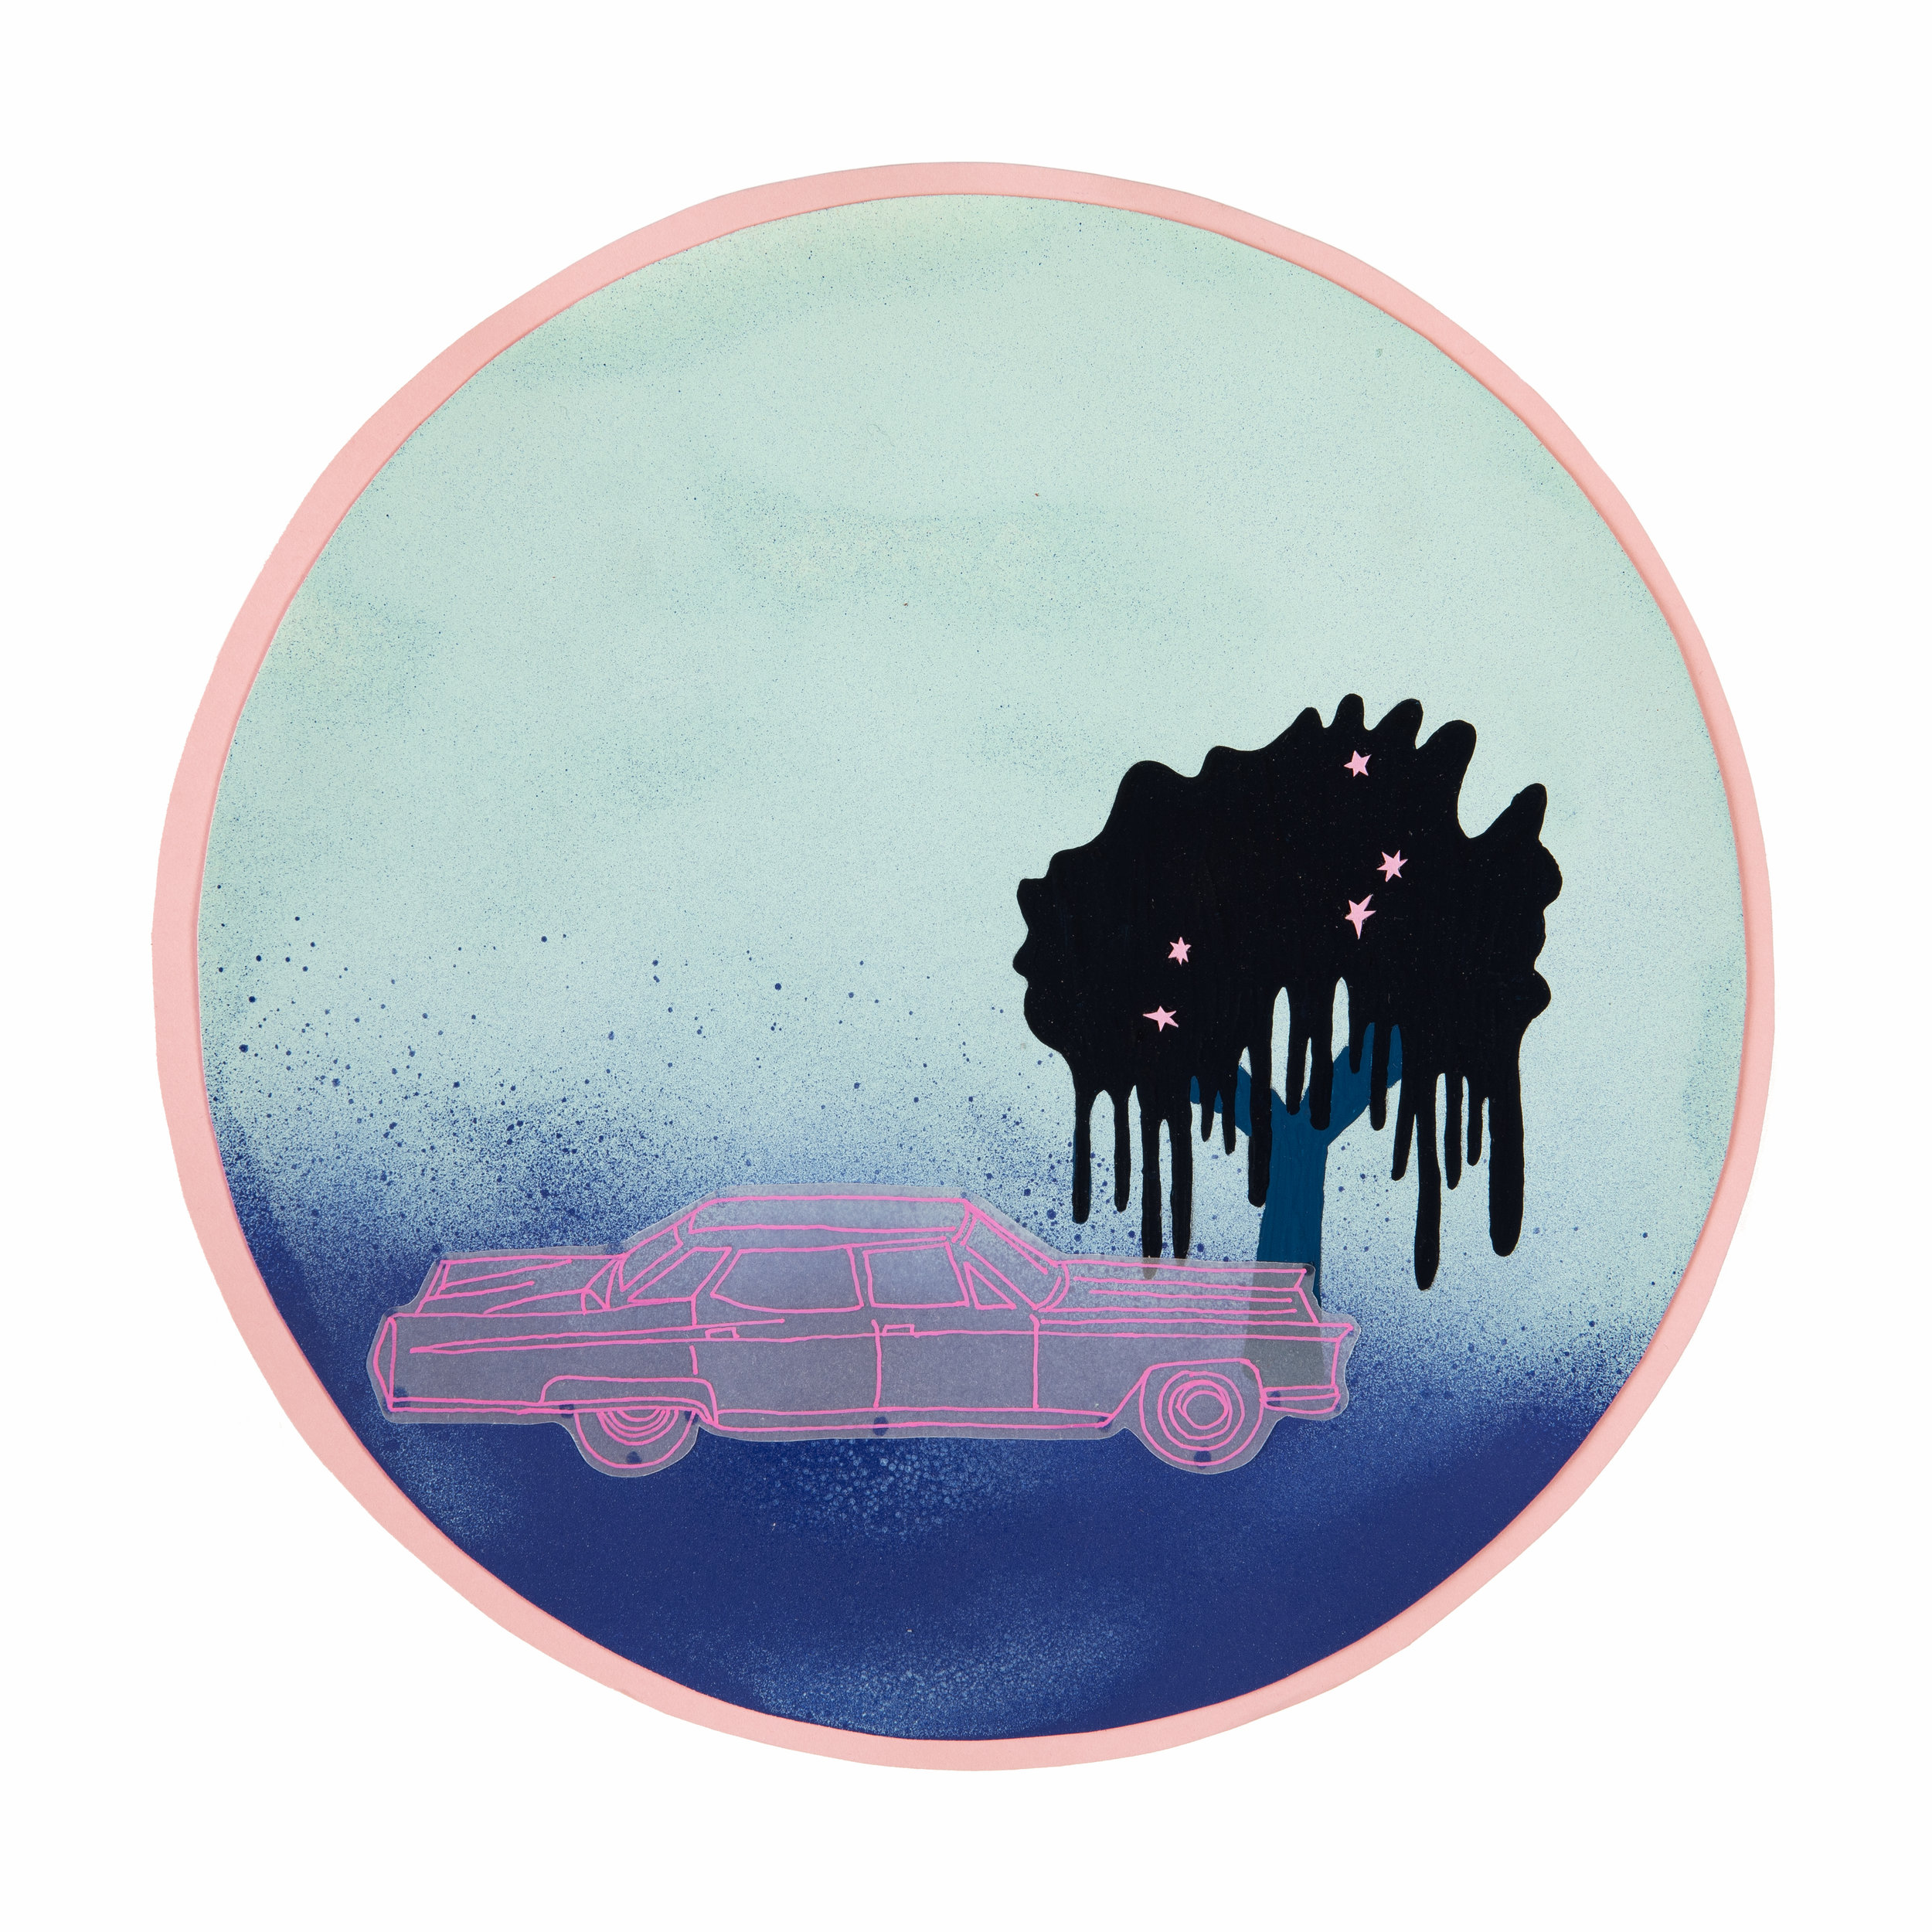   Pink Cadillac Dream   Mixed media on paper, 8 ½” diameter, 2019 